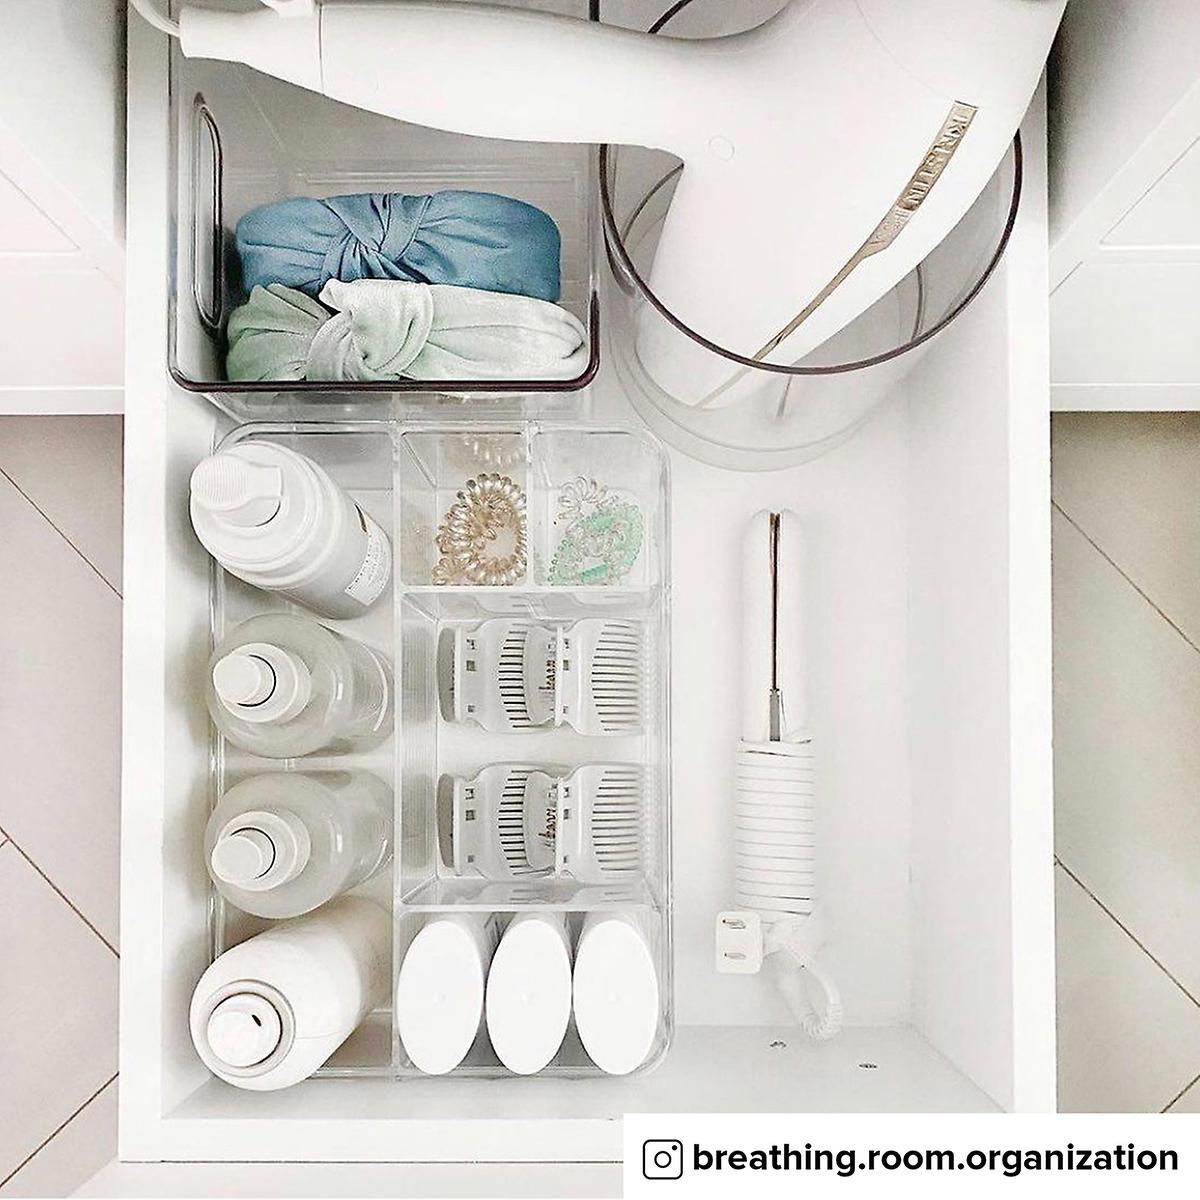 Acrylic Hair Care Organizer | The Container Store